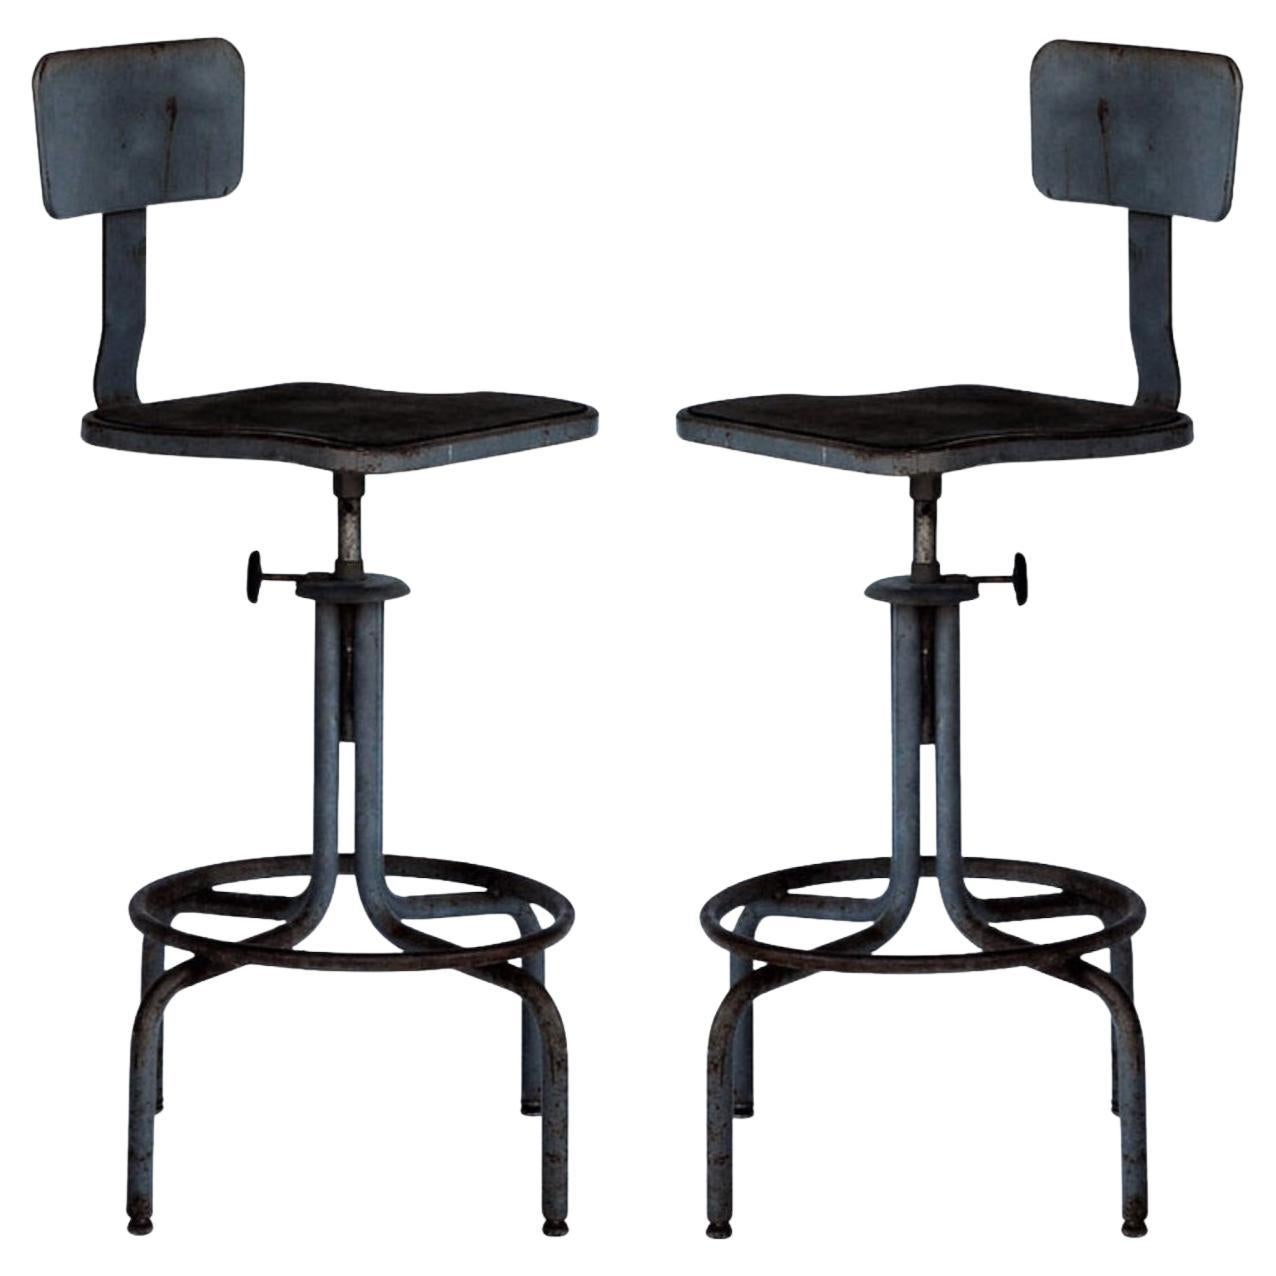 Pair of Swiveling Workshop Bar Stools For Sale